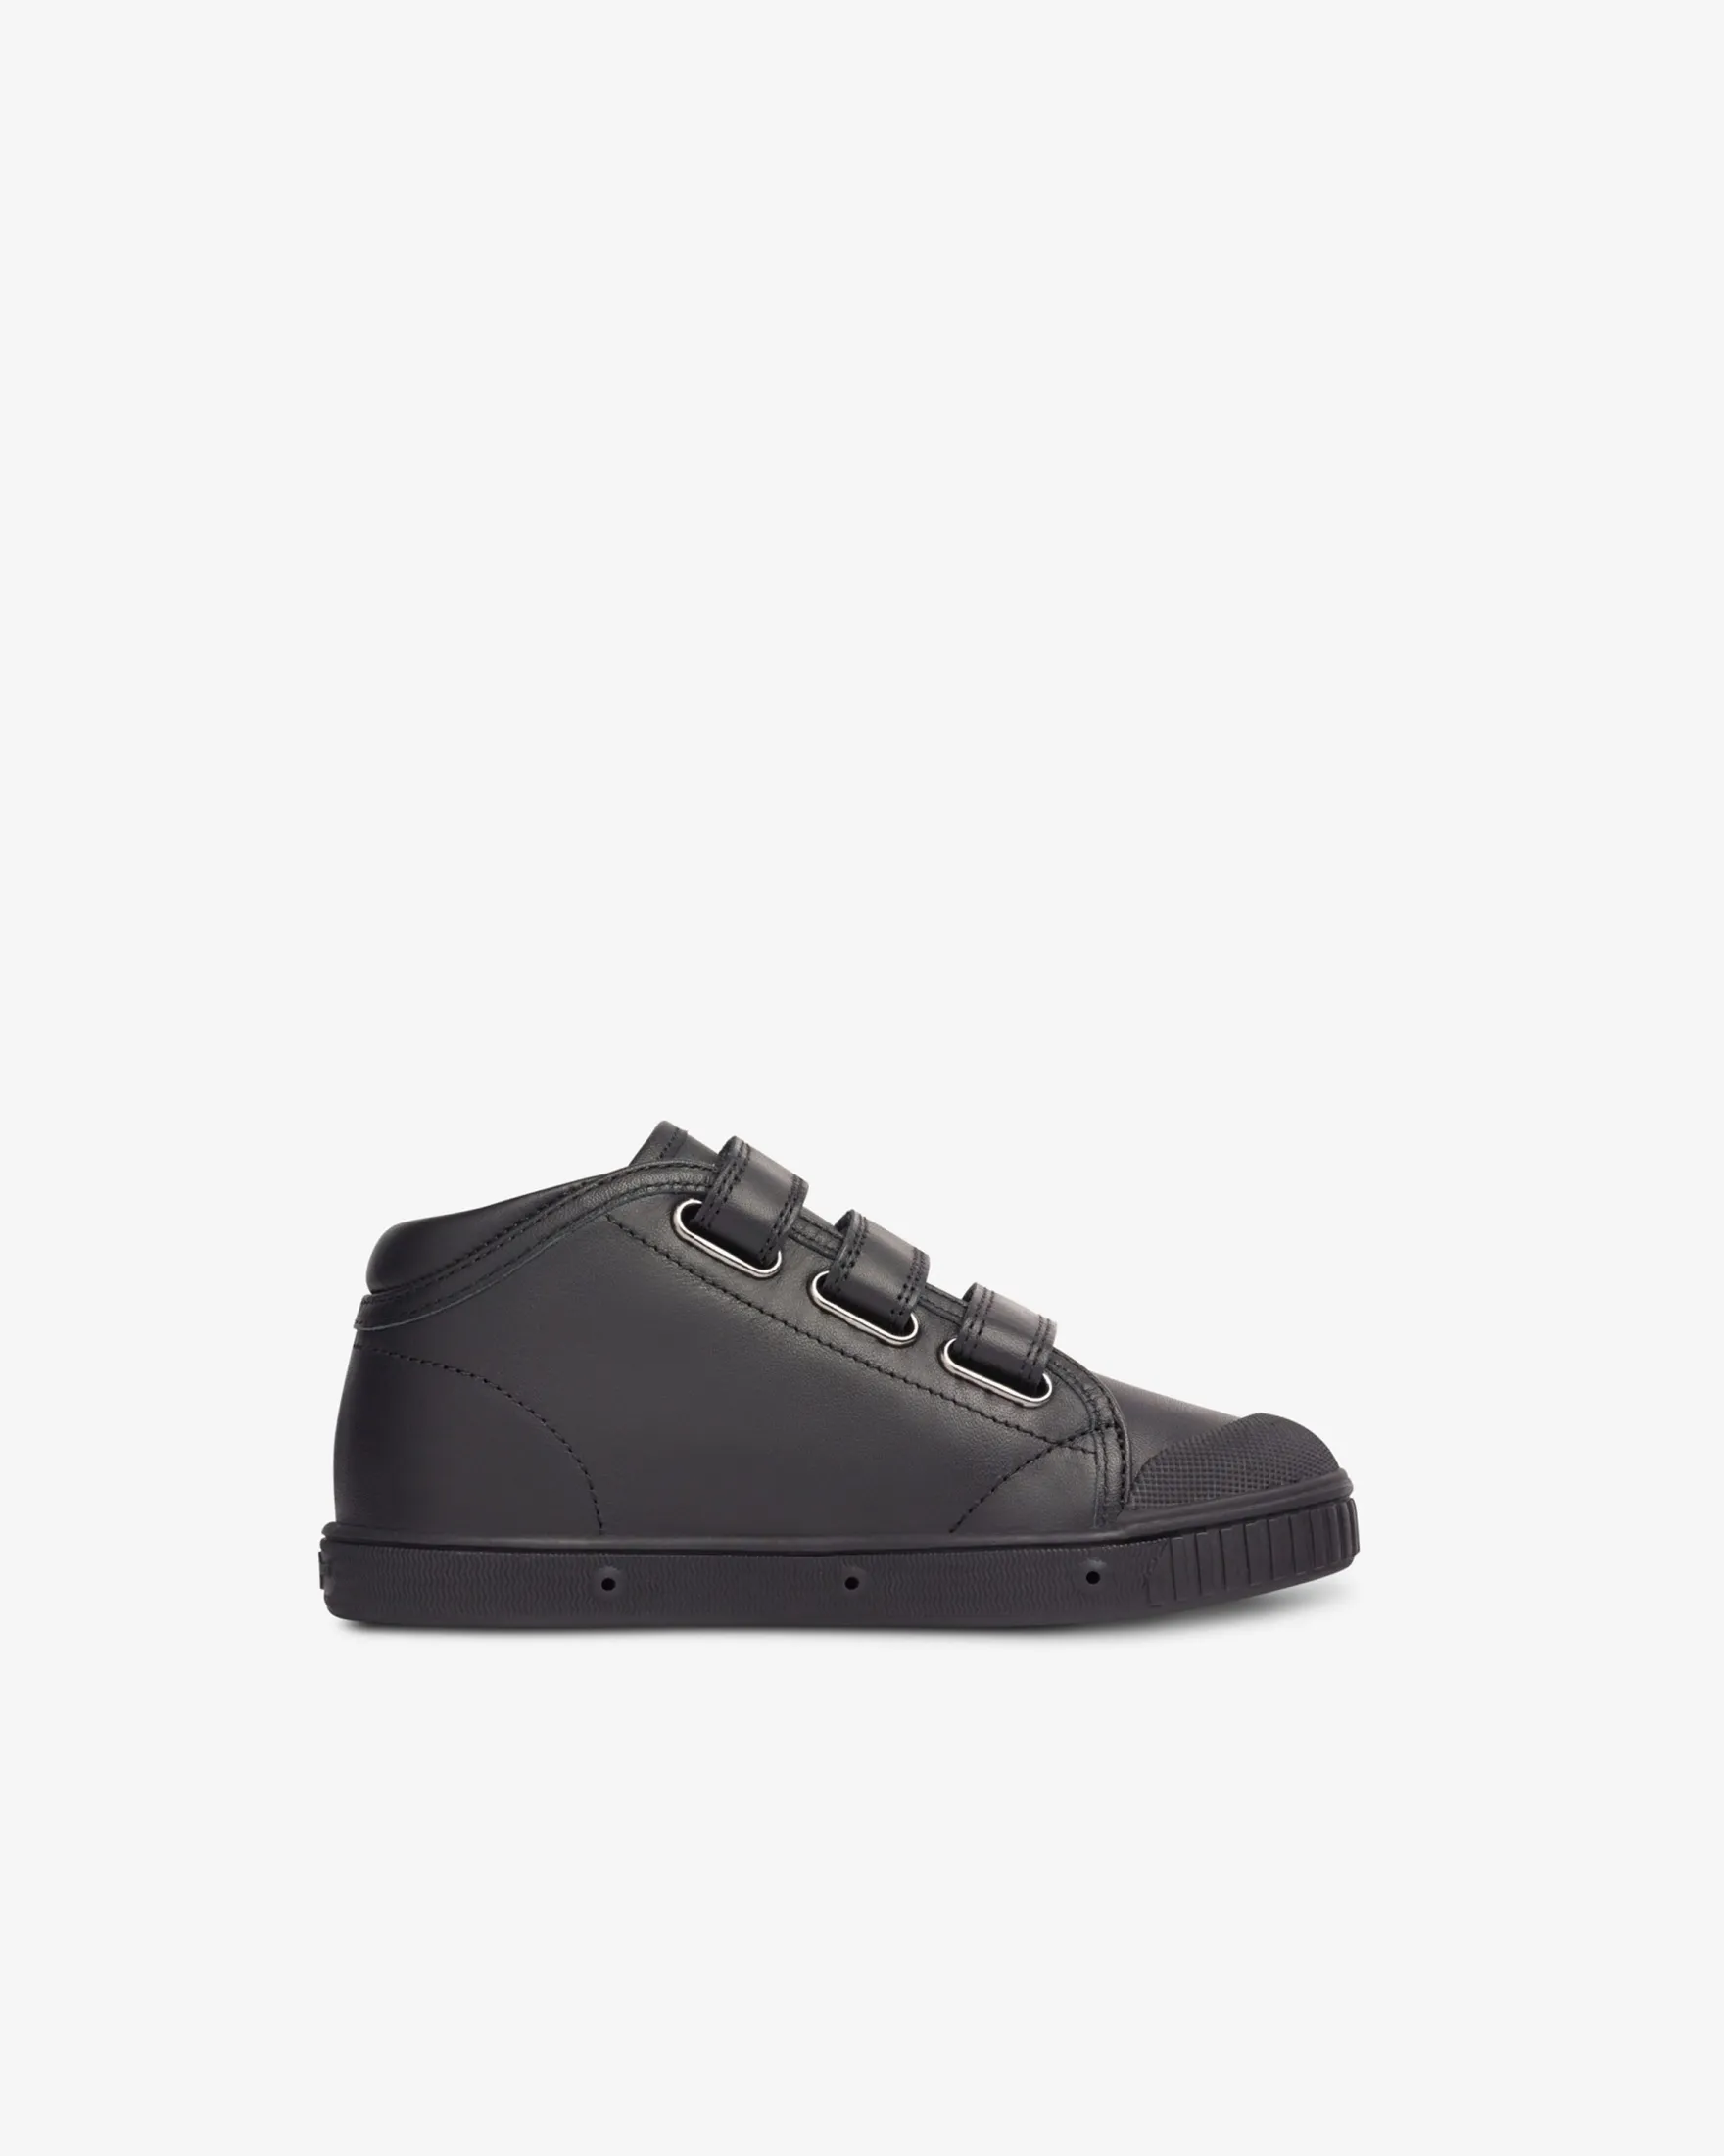 Children's high top leather trainer